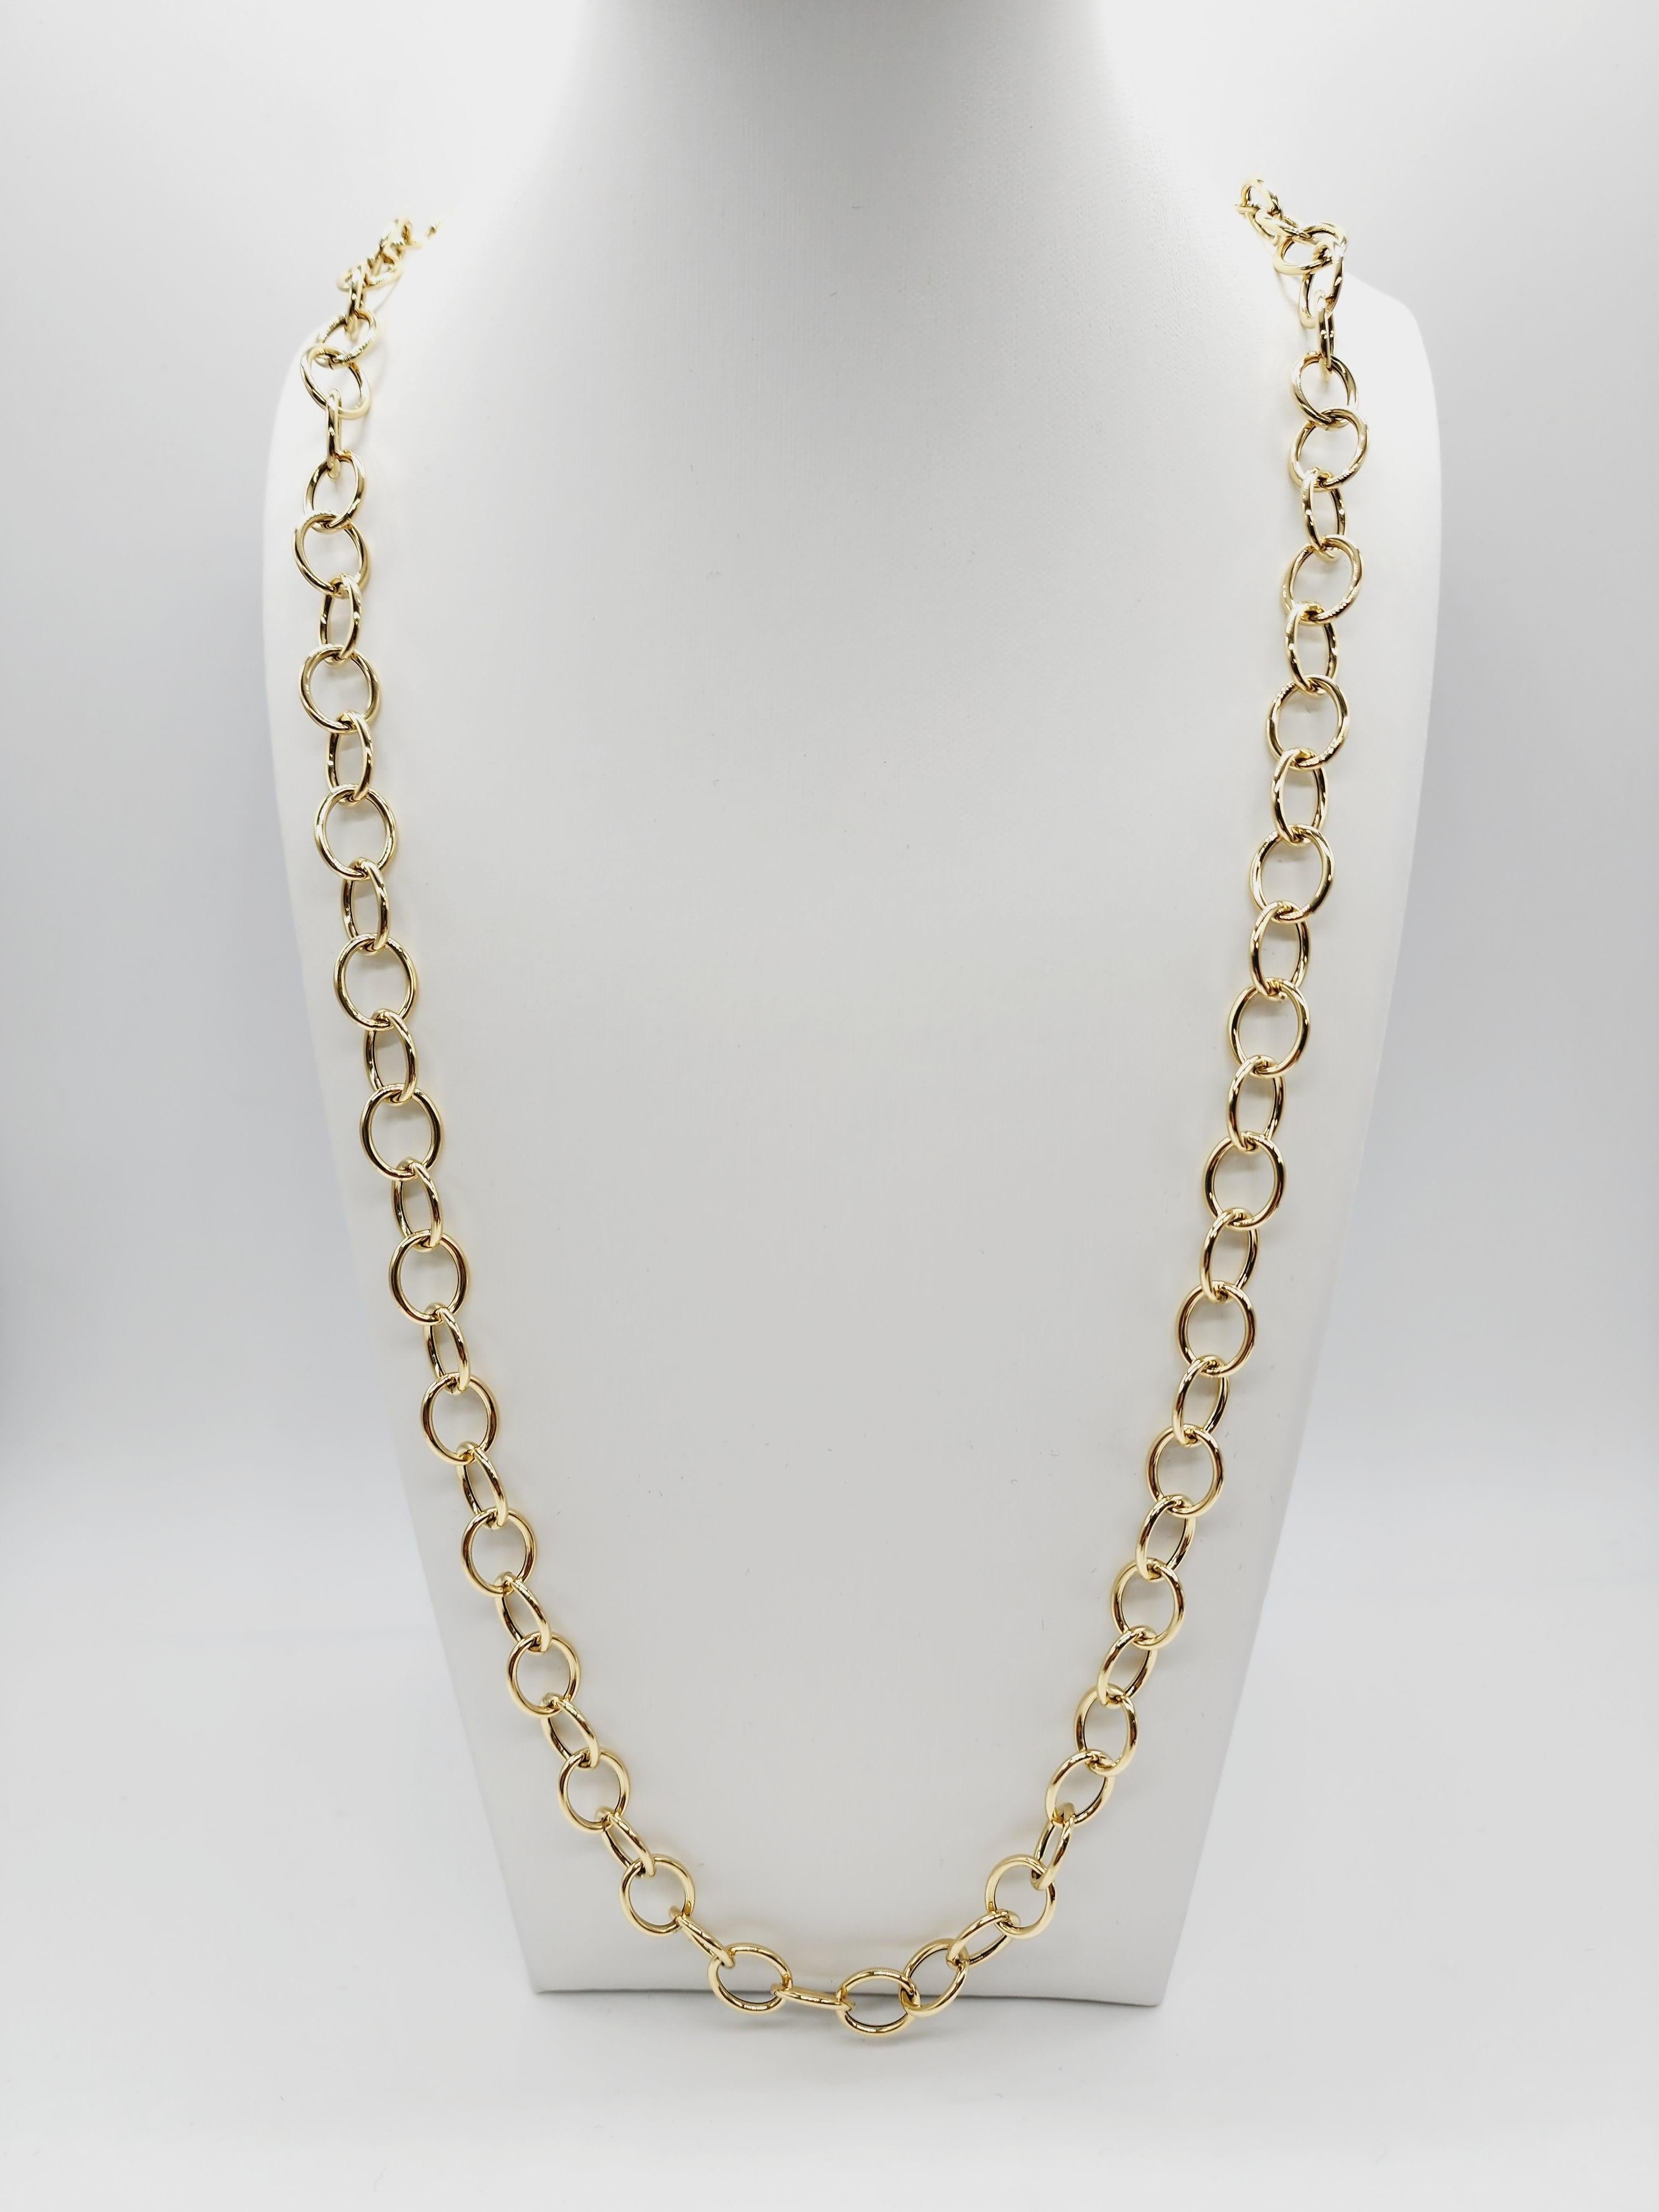 Italian made designer 18k gold link chain necklace in yellow gold. A modern, edgy, and timeless necklace chain.

Links: Approx. 9.5 mm wide
Weight: 28'' length is approx. 13.50 grams
Hollow Yellow Chain 18K Yellow Gold. 
Light weight easy to wear.